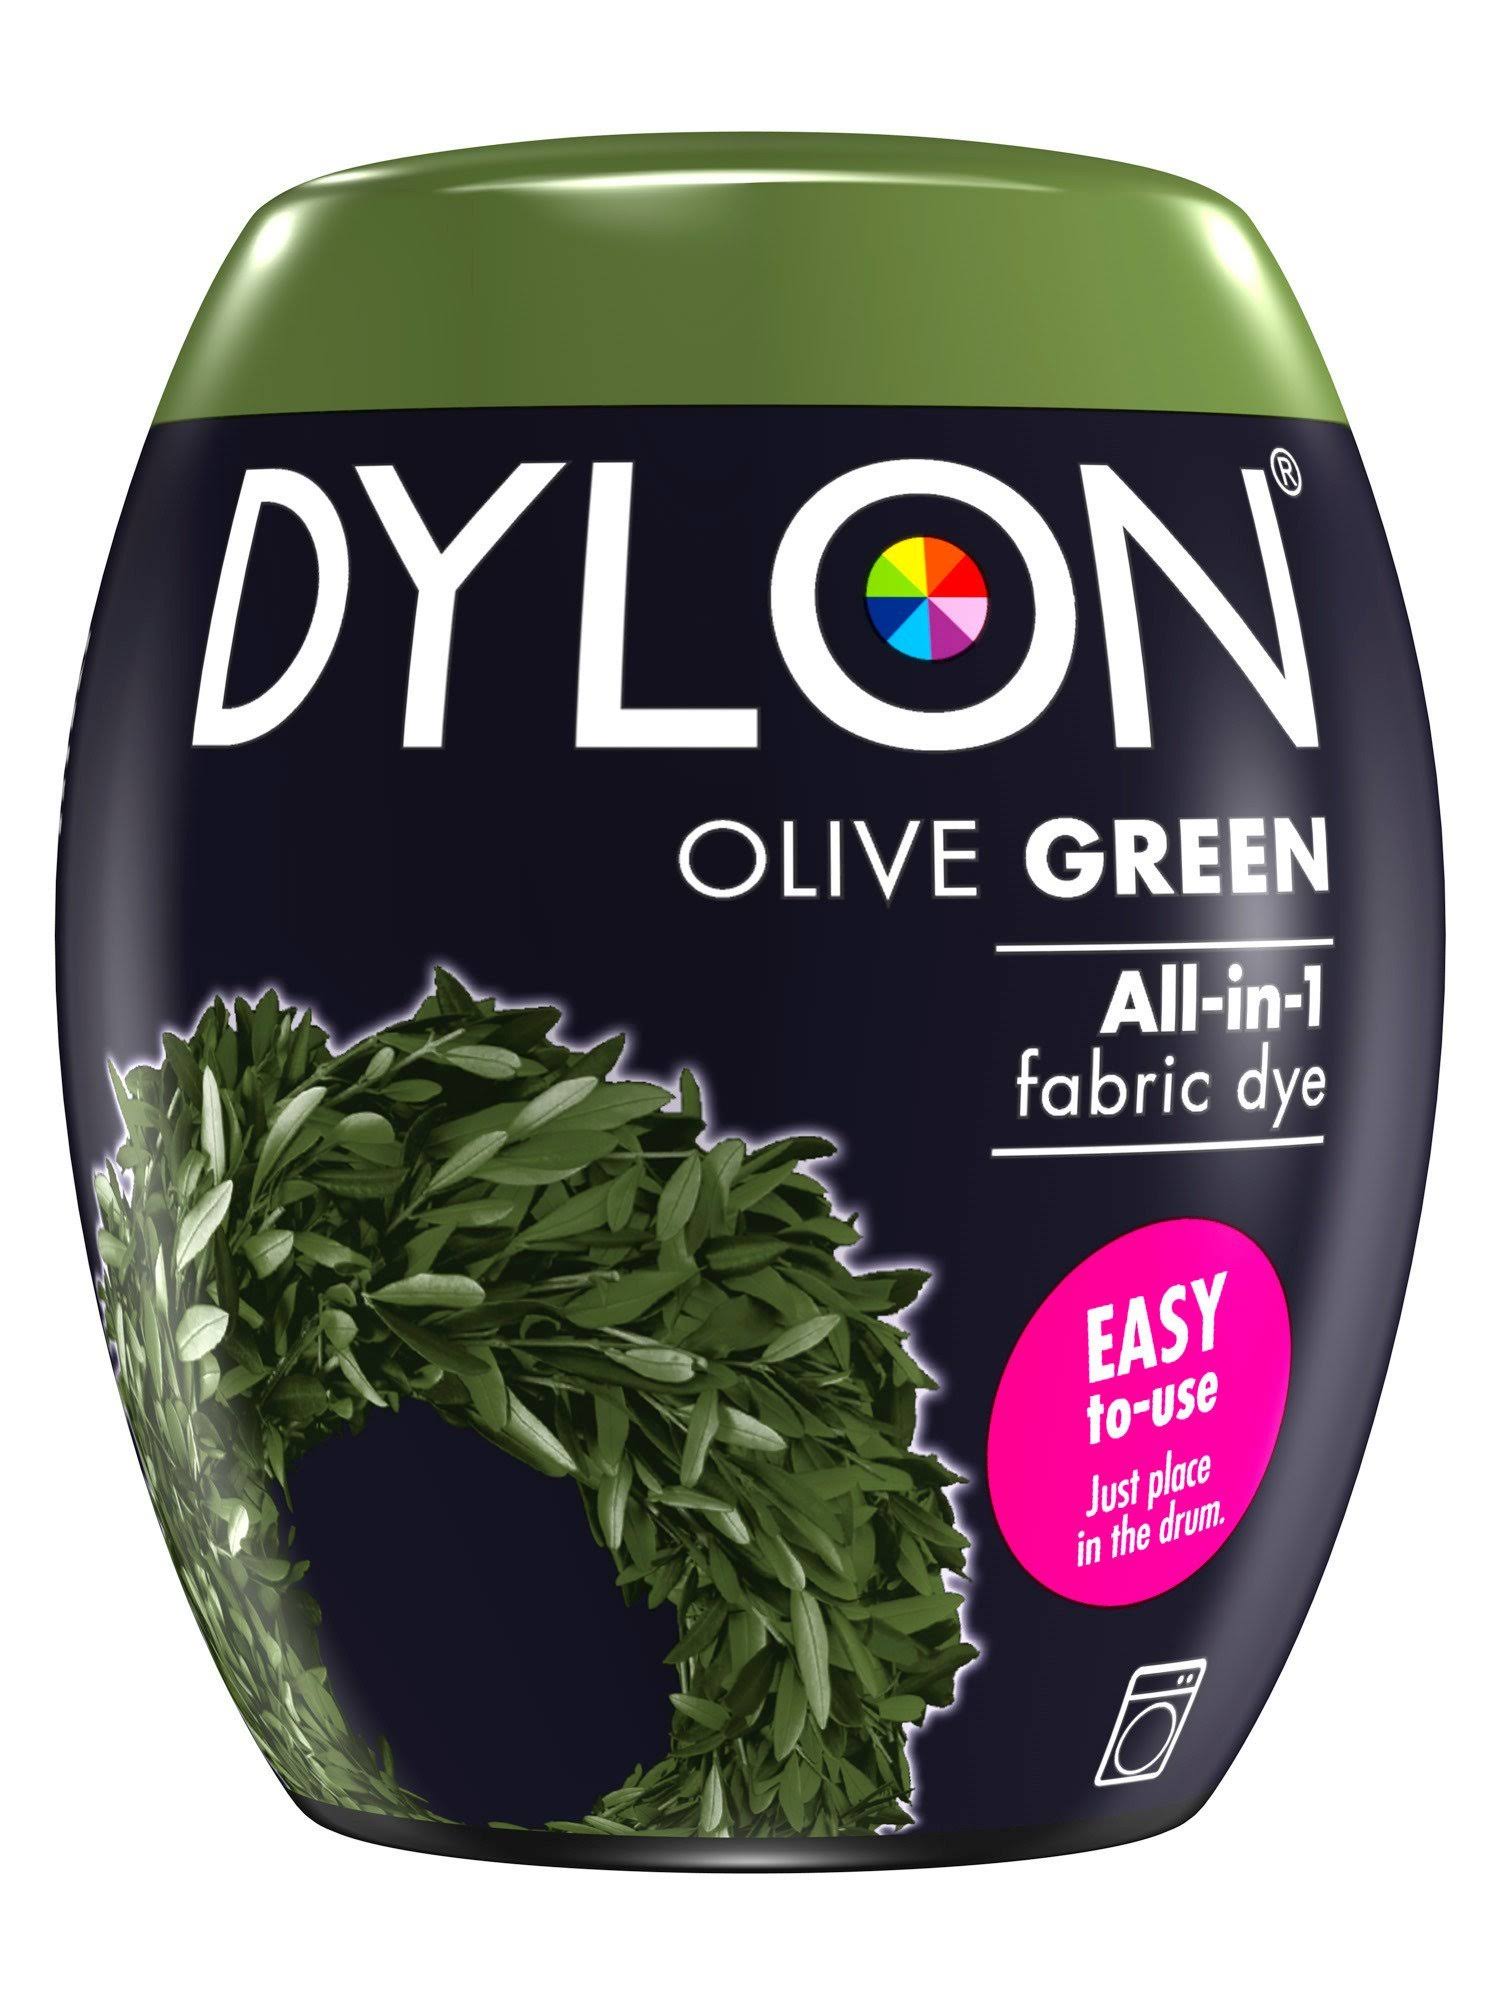 Dylon Machine Clothes All in One Fabric Dye Pod - Olive Green, 350g